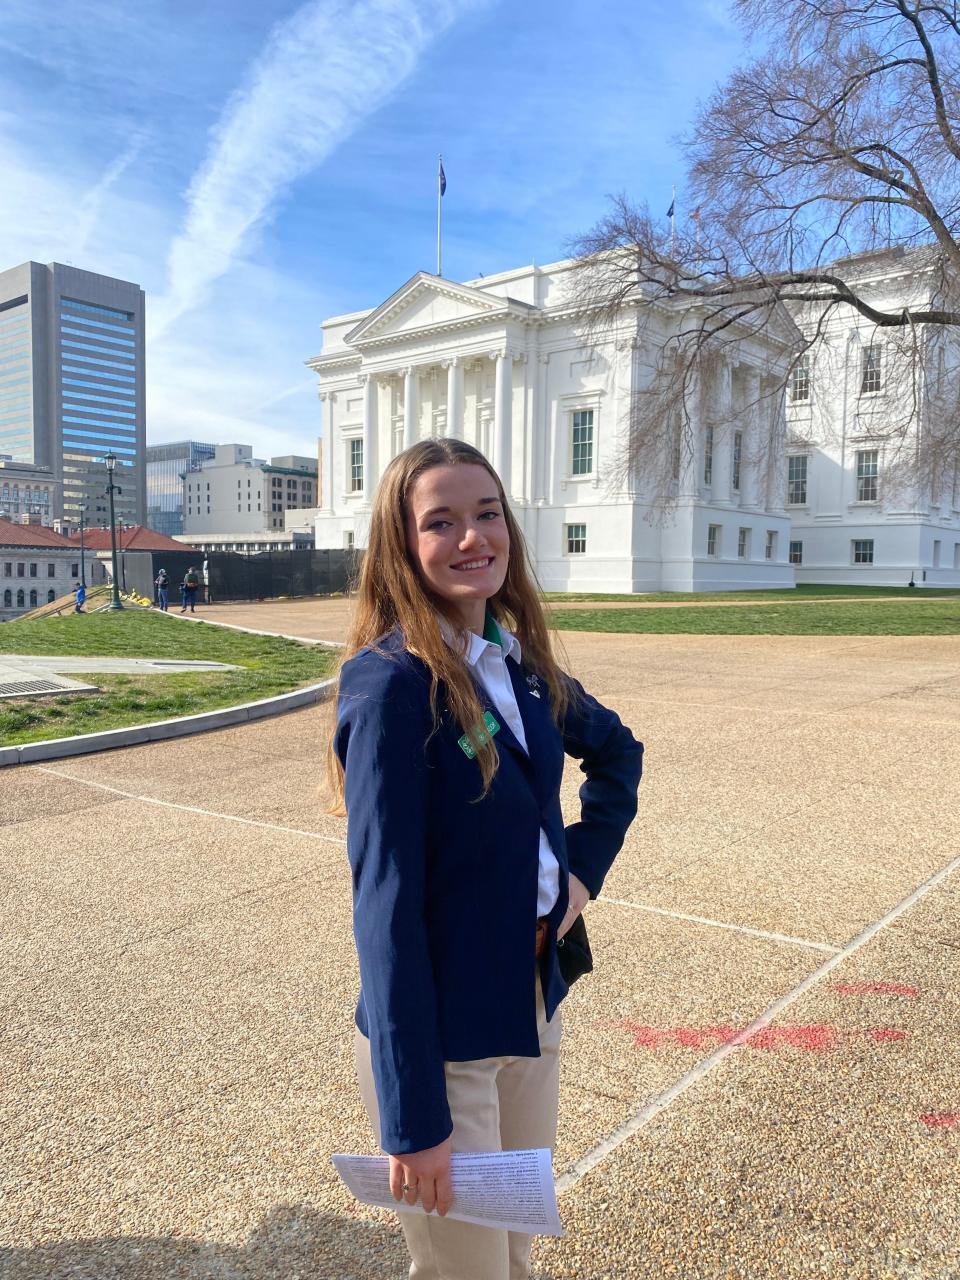 Sophia Gallivan is pictured handing out information about the Chincoteague Ponies and Pony Penning in Richmond, Virginia, prior to meeting with the First Lady of the United States.